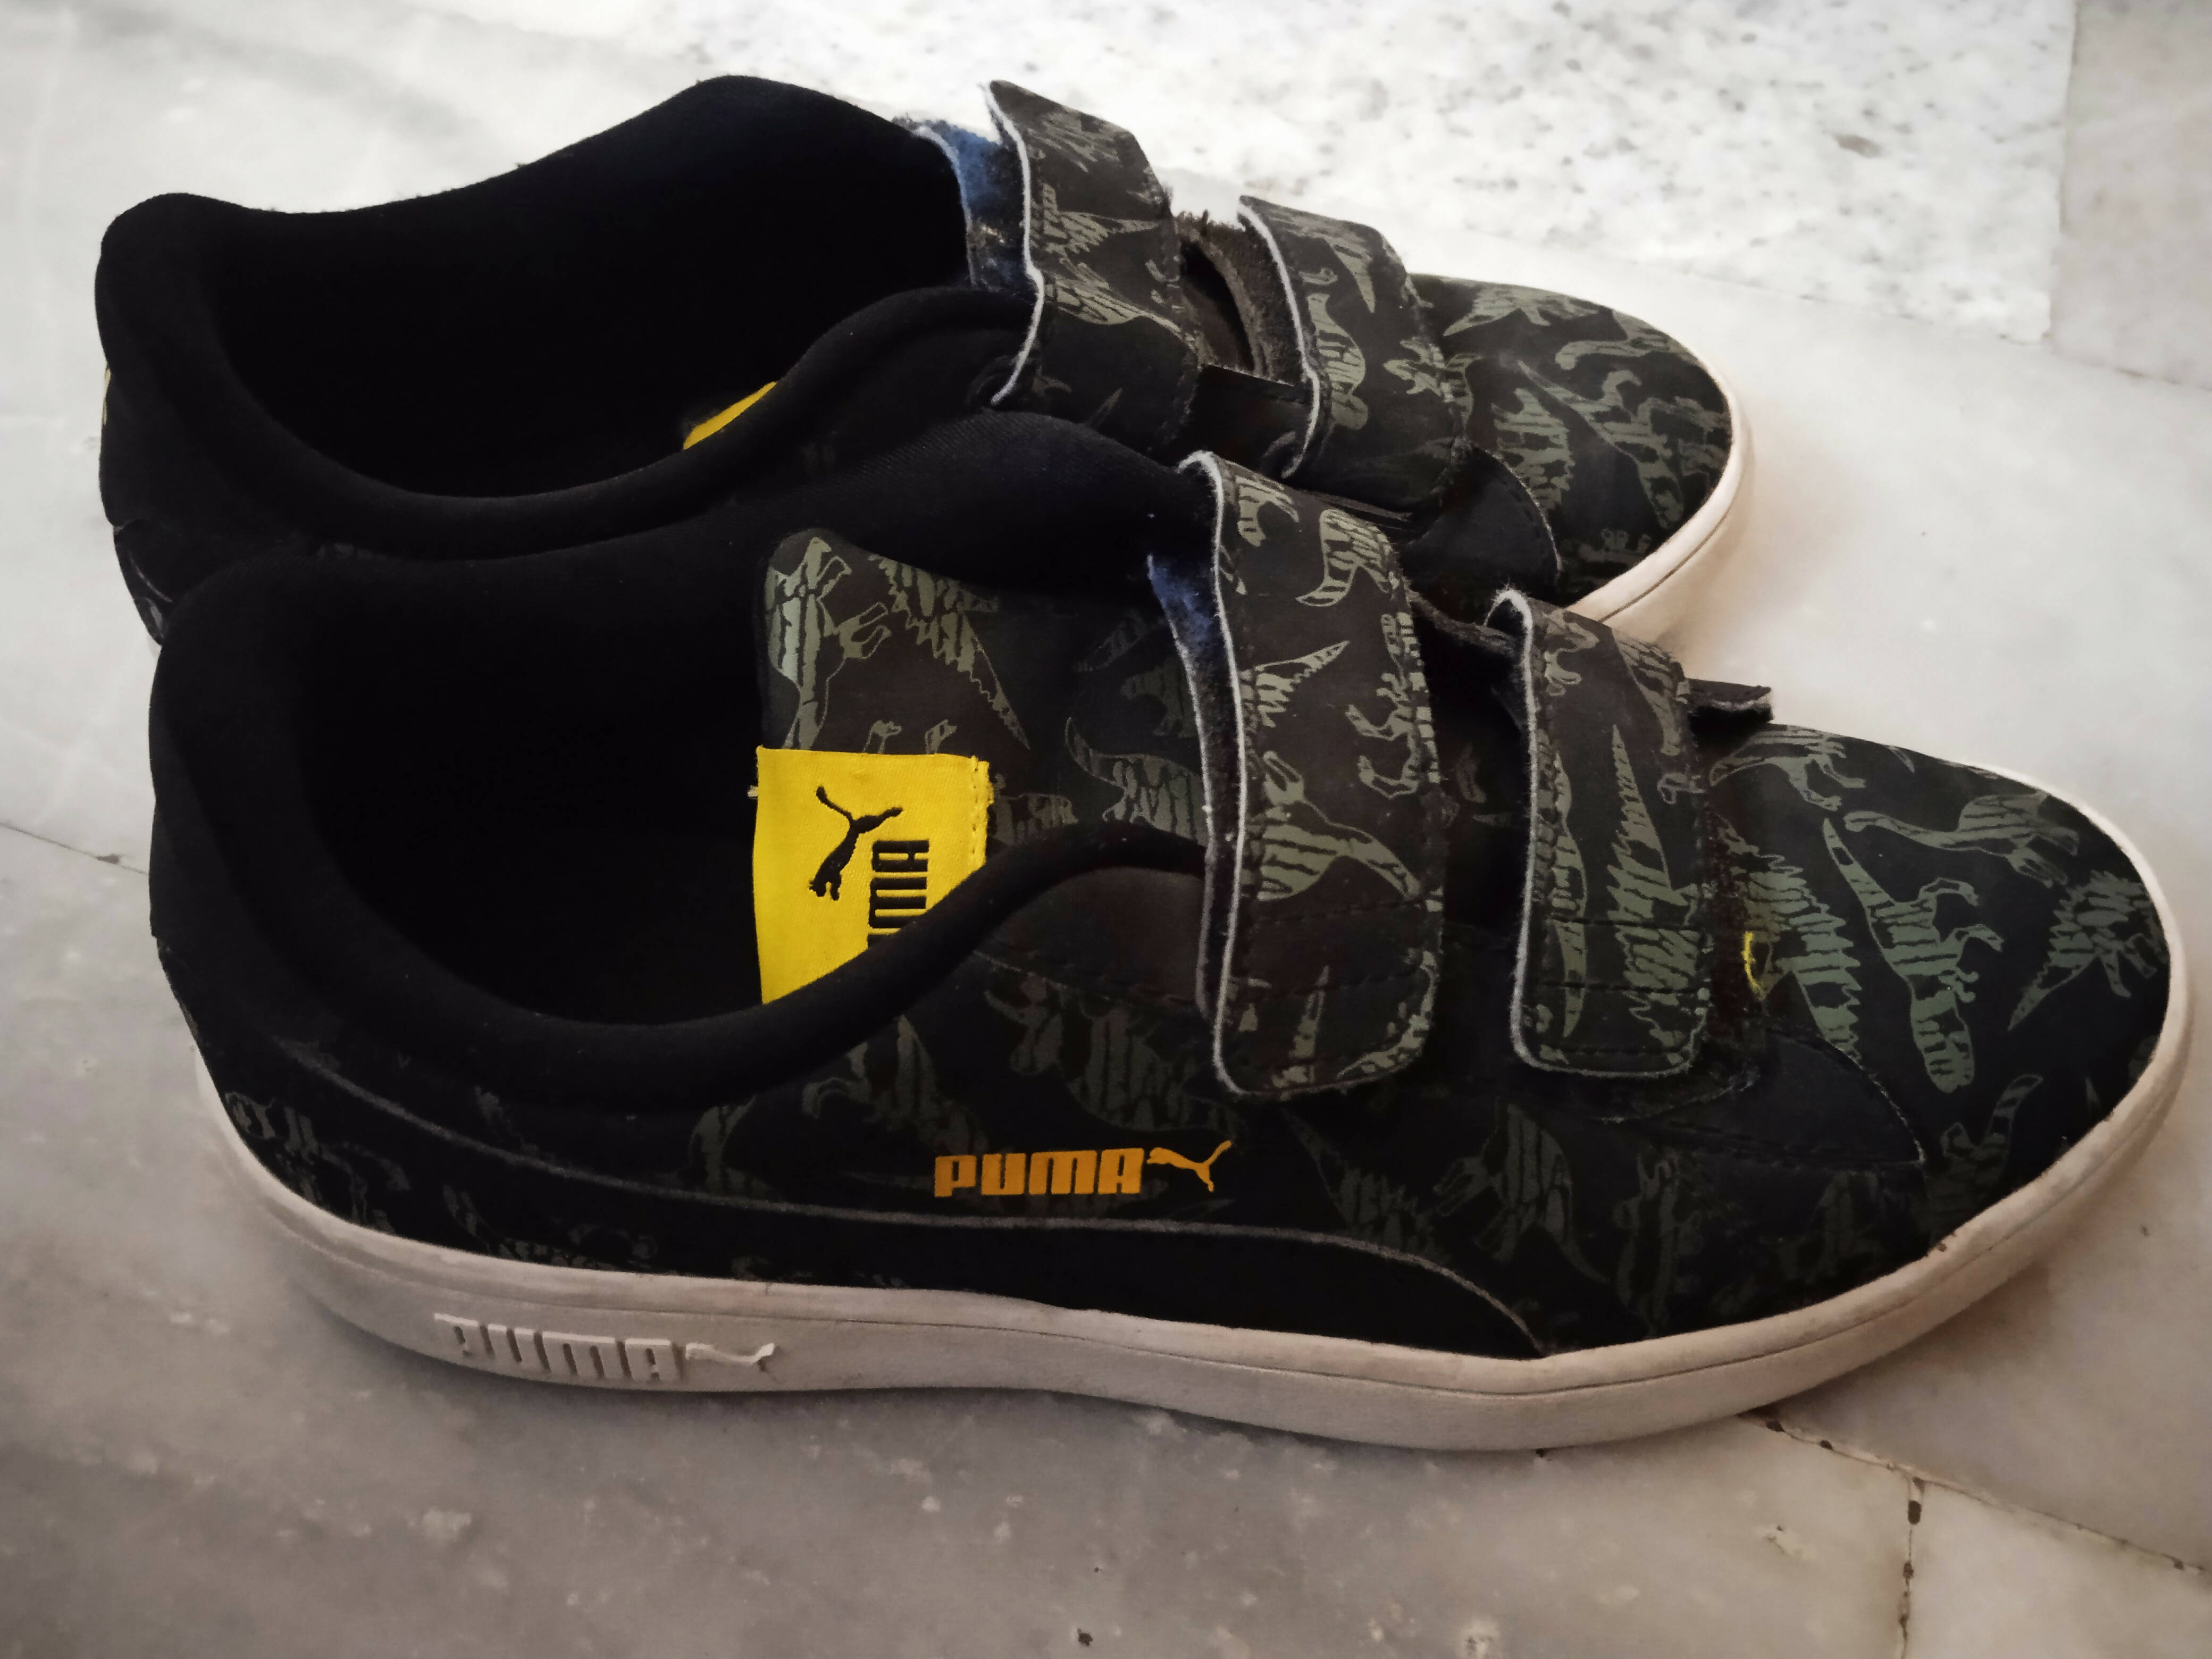 Puma shoes with military prints for boy- 7years - PyaraBaby